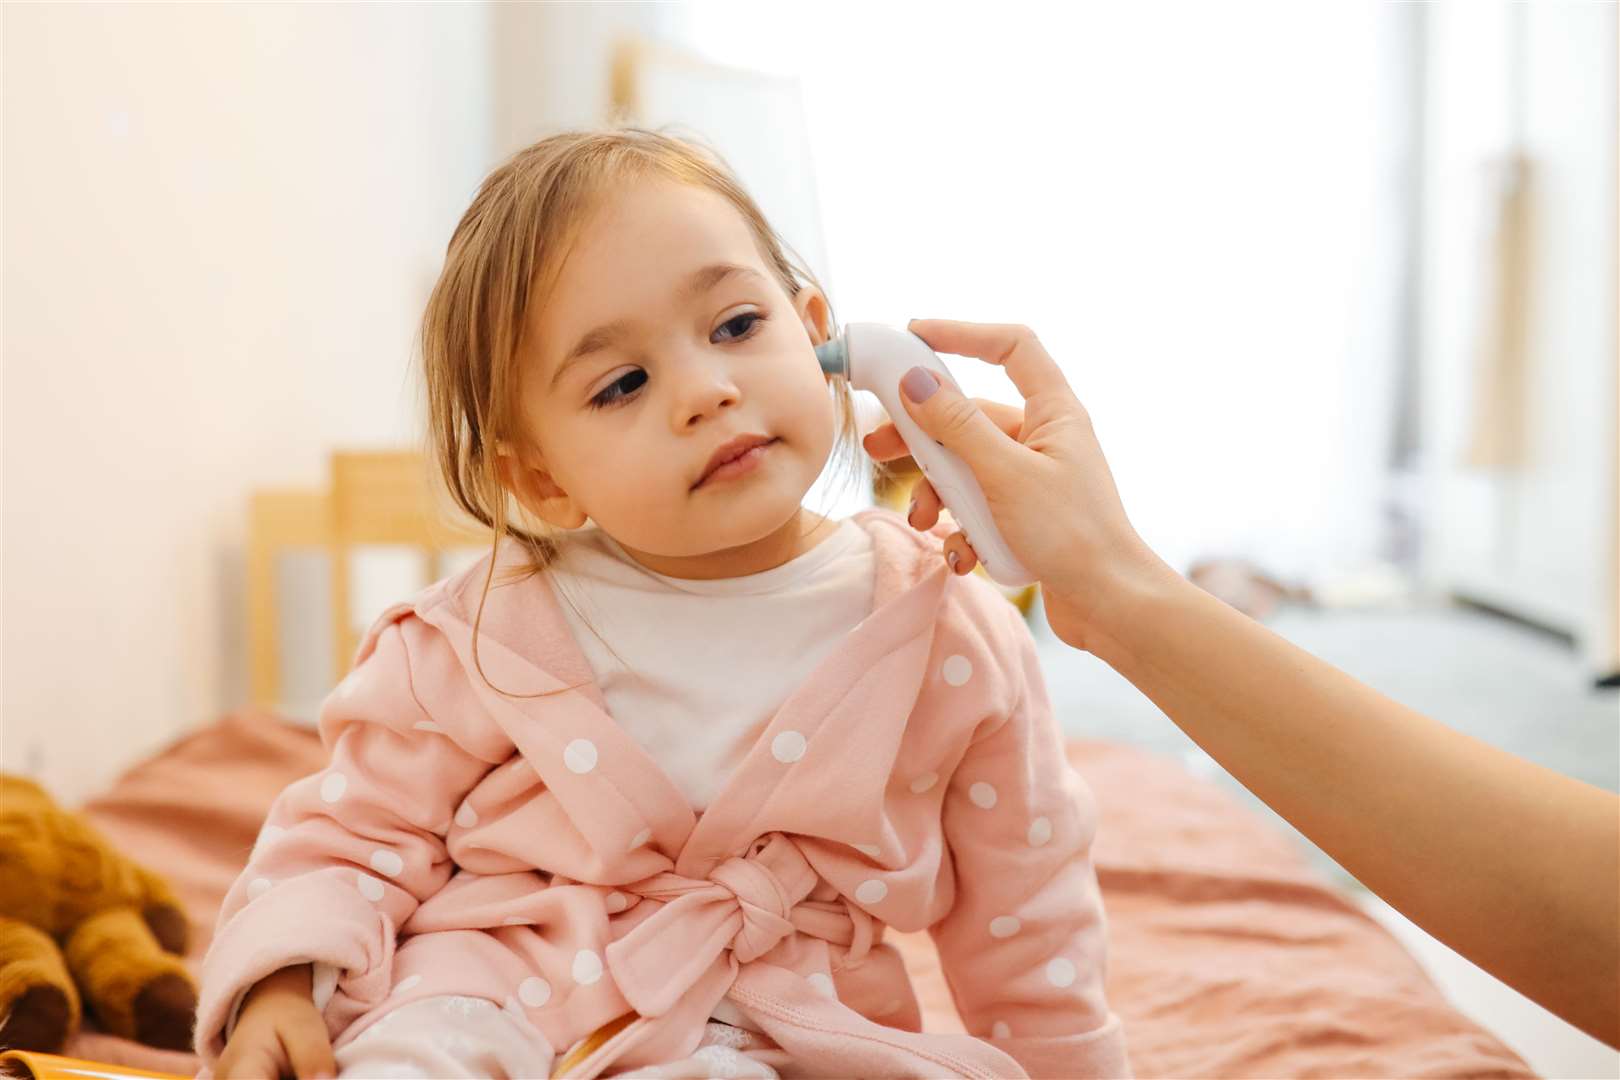 While serious infection is rare parents are being told to ask for help if their child goes downhill. Image: Stock photo.